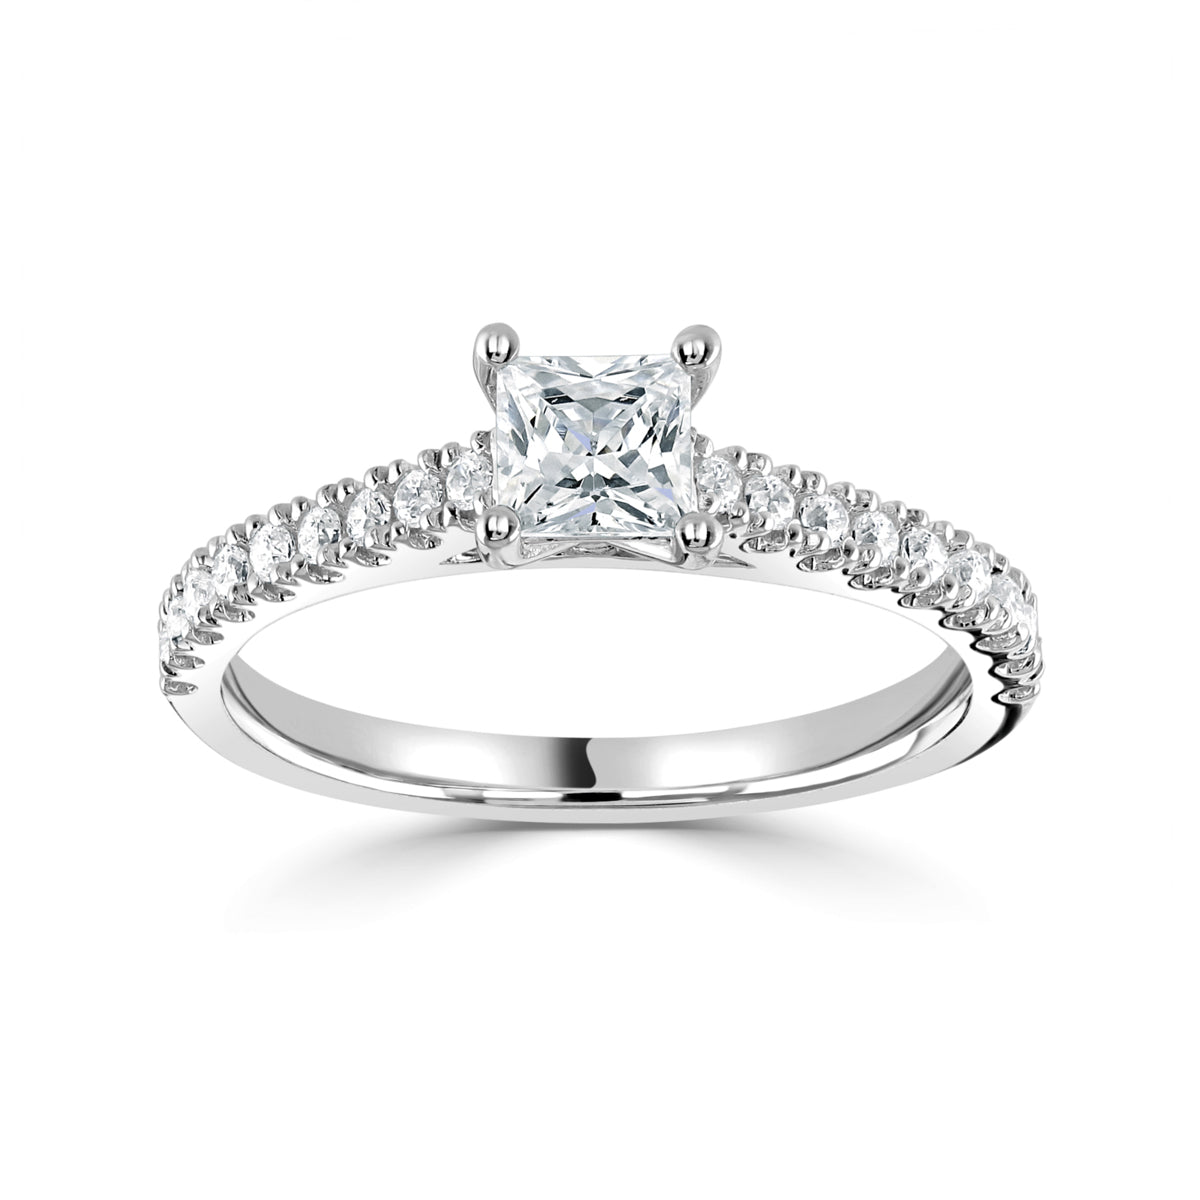 Princess square cut diamond 4 claw setting with diamond  shoulders ring